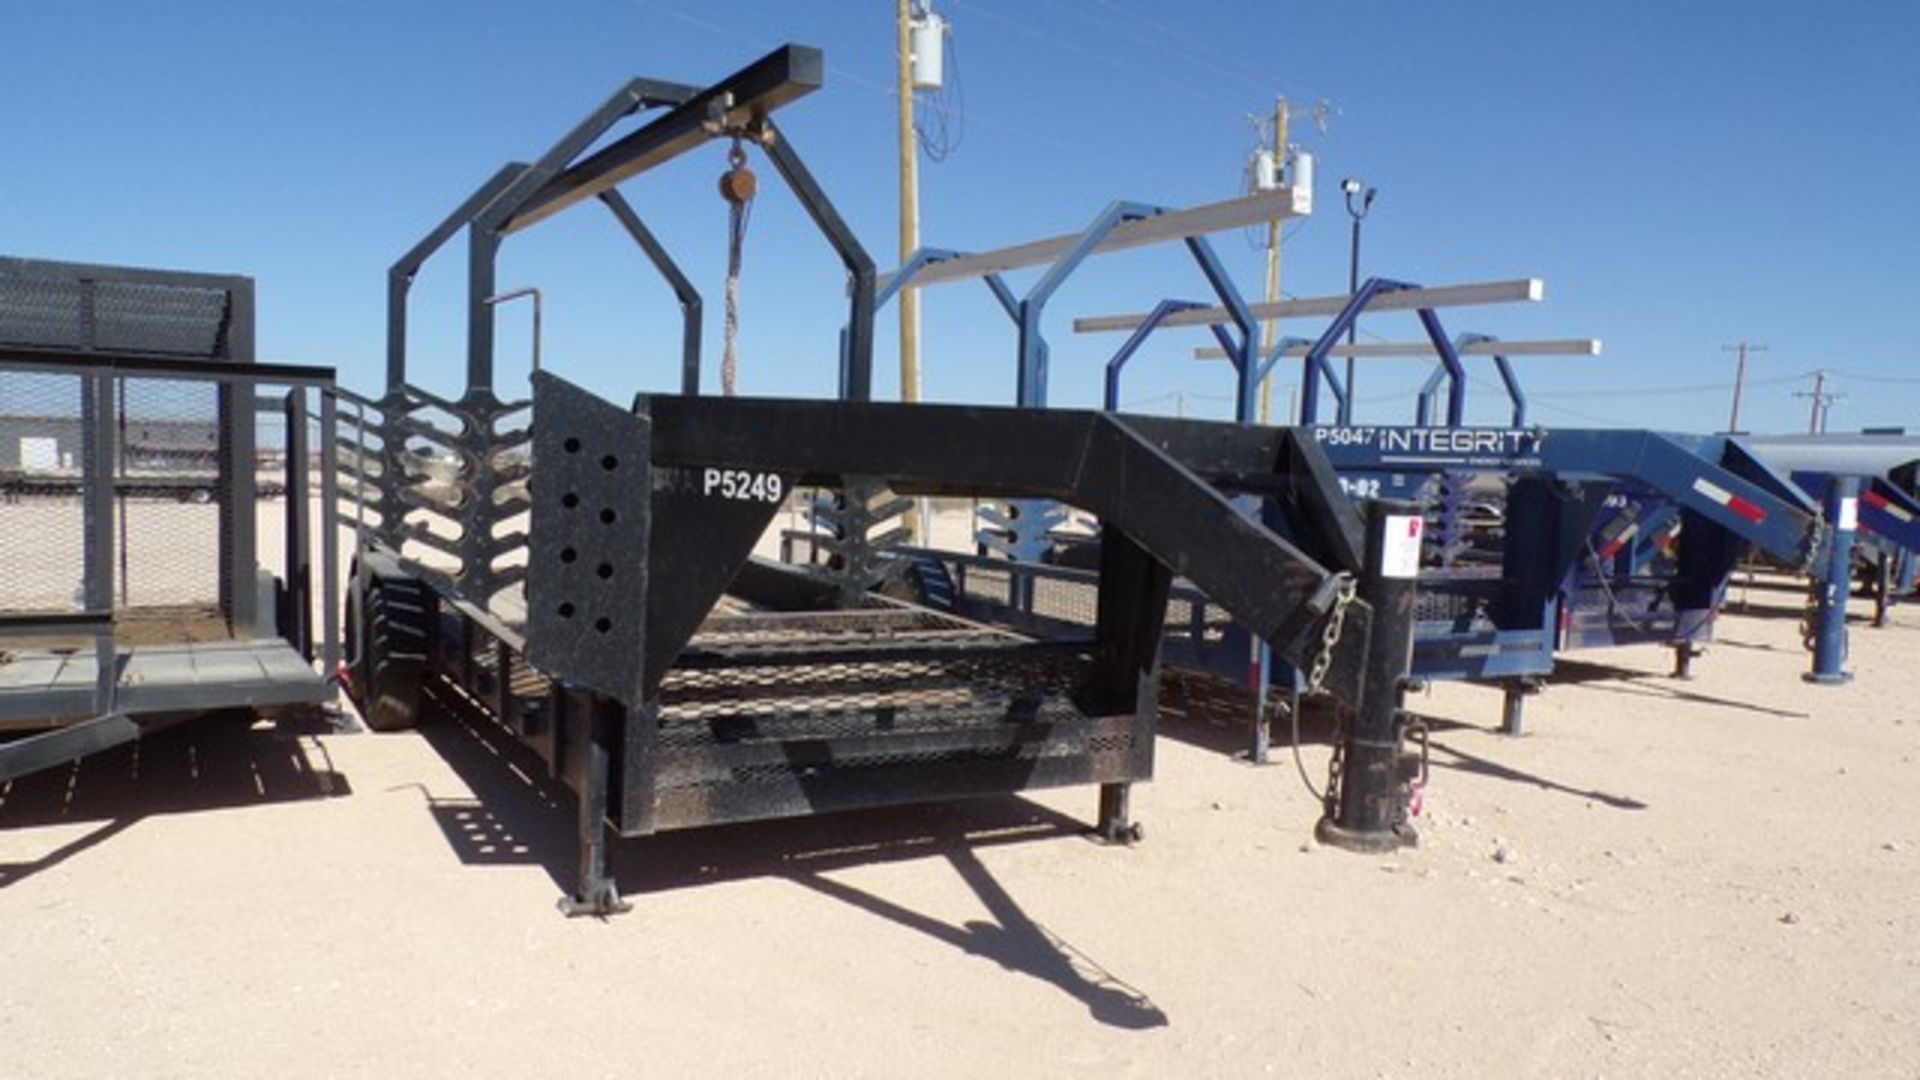 Located in YARD 1 - Midland, TX (P5249) (2357) (X) 2019 PULL DO T/A COMBO MONORAIL/ TOOL TRAILER,